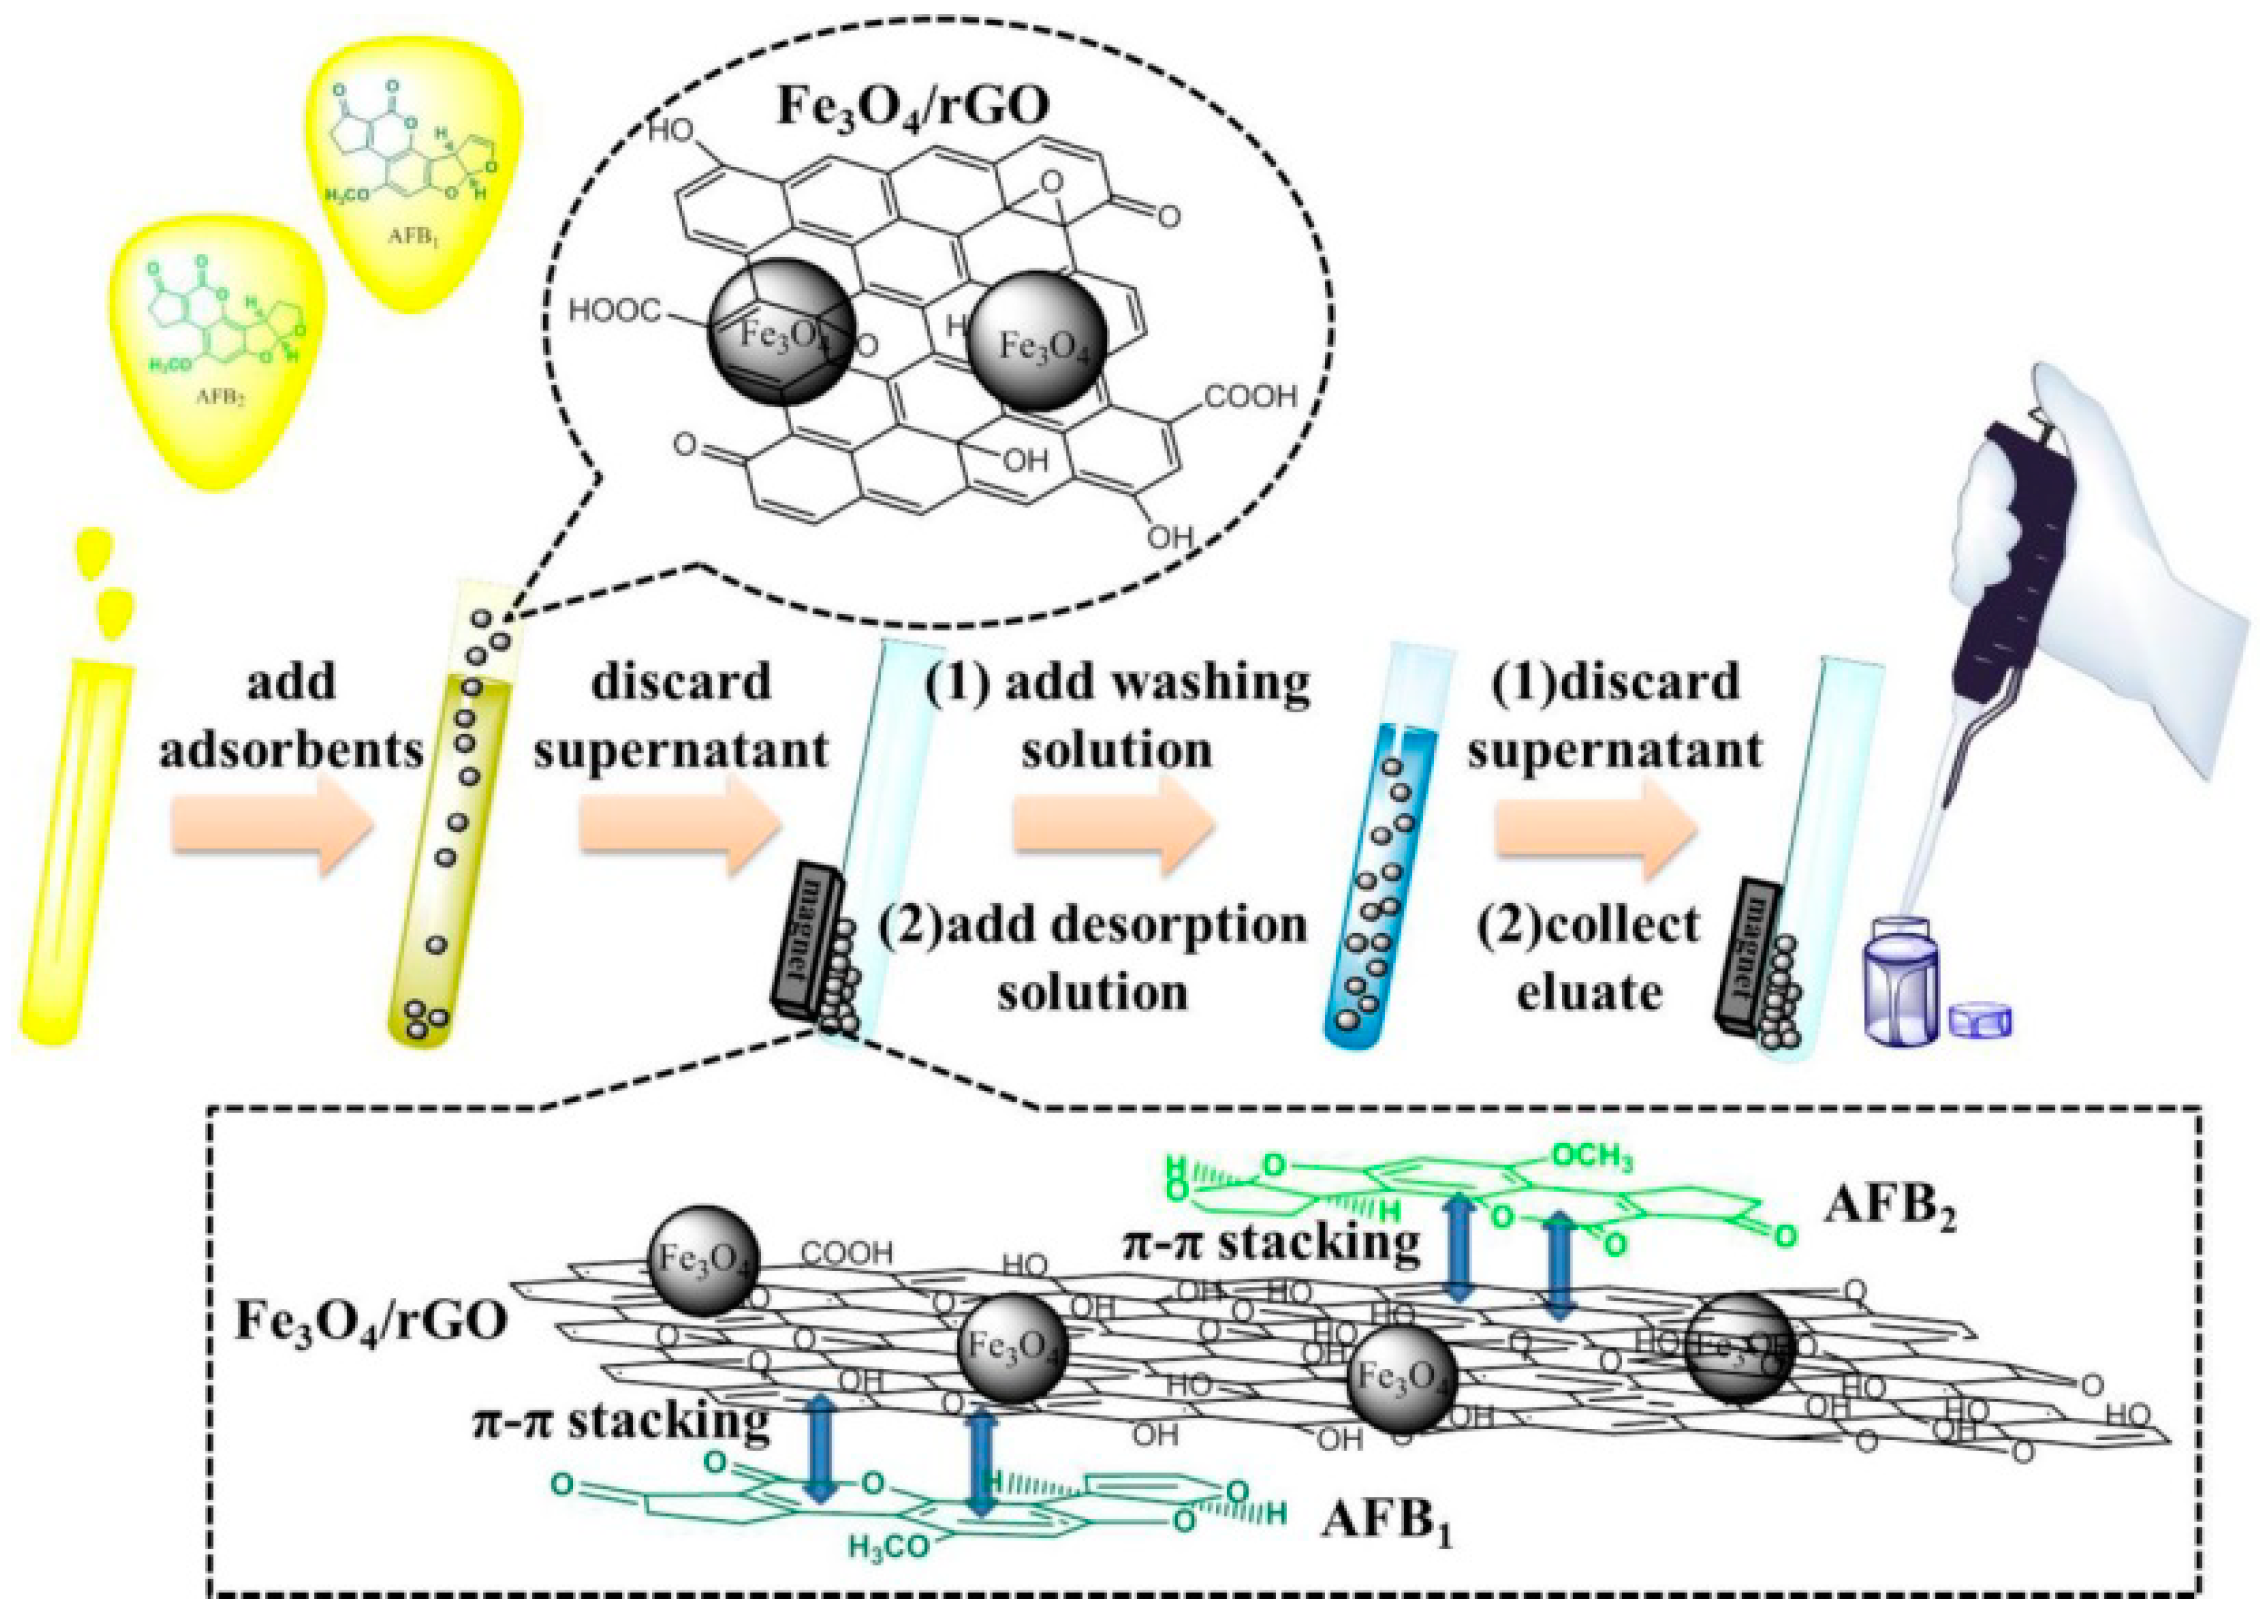 Determination of Aflatoxin B1 and B2 in Vegetable Oils Using Fe3O4/rGO Magnetic Solid Phase Extraction Coupled with High-Performance Liquid Chromatography Fluorescence with Post-Column Photochemical Derivatization